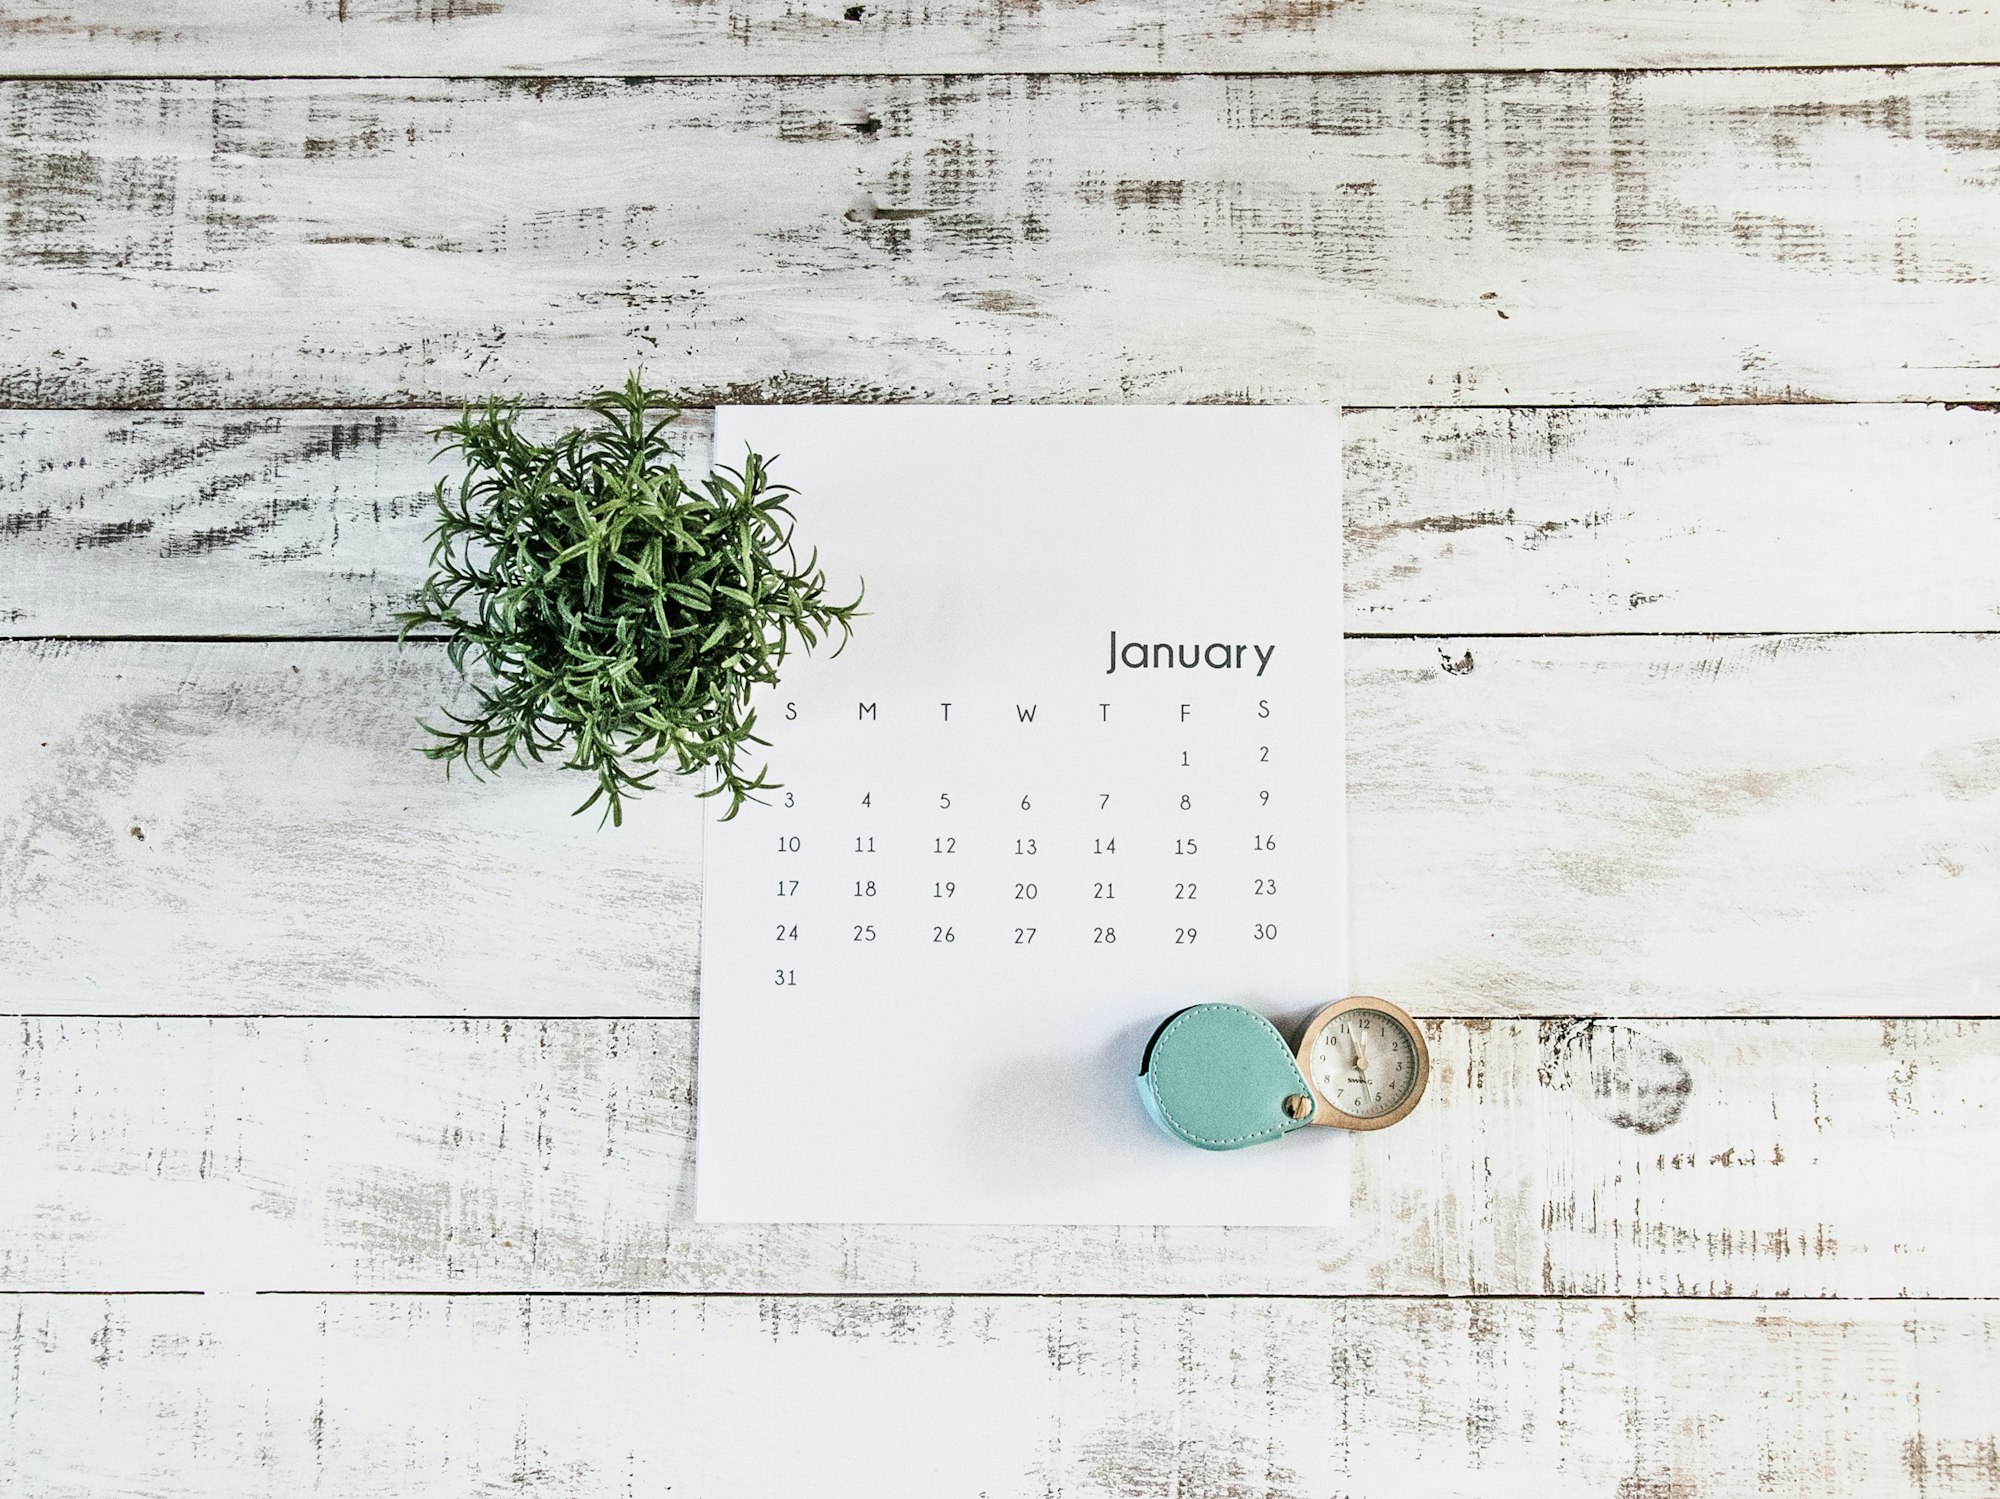 Creating a Content Calendar: Planning and Organizing Your Posts